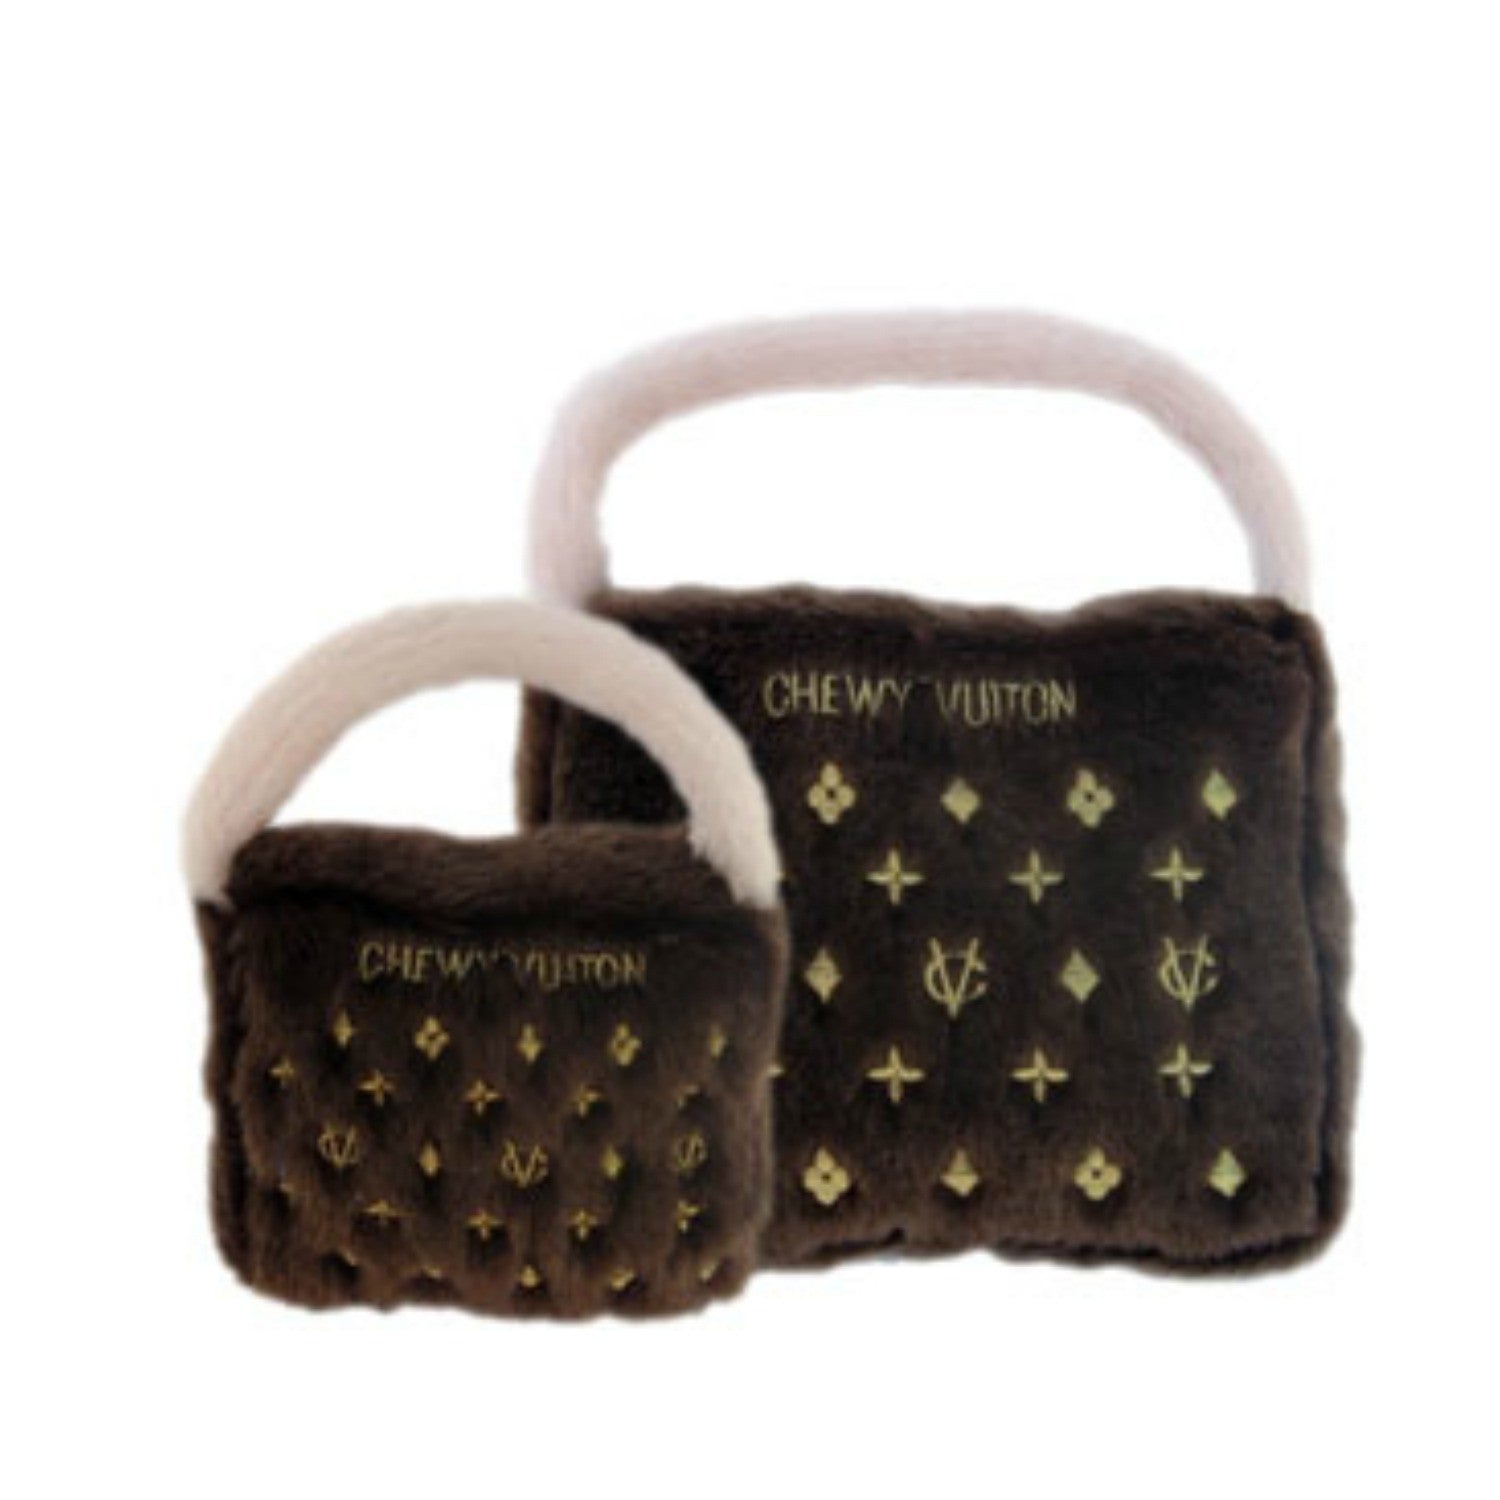 chewy vuitton dog bag